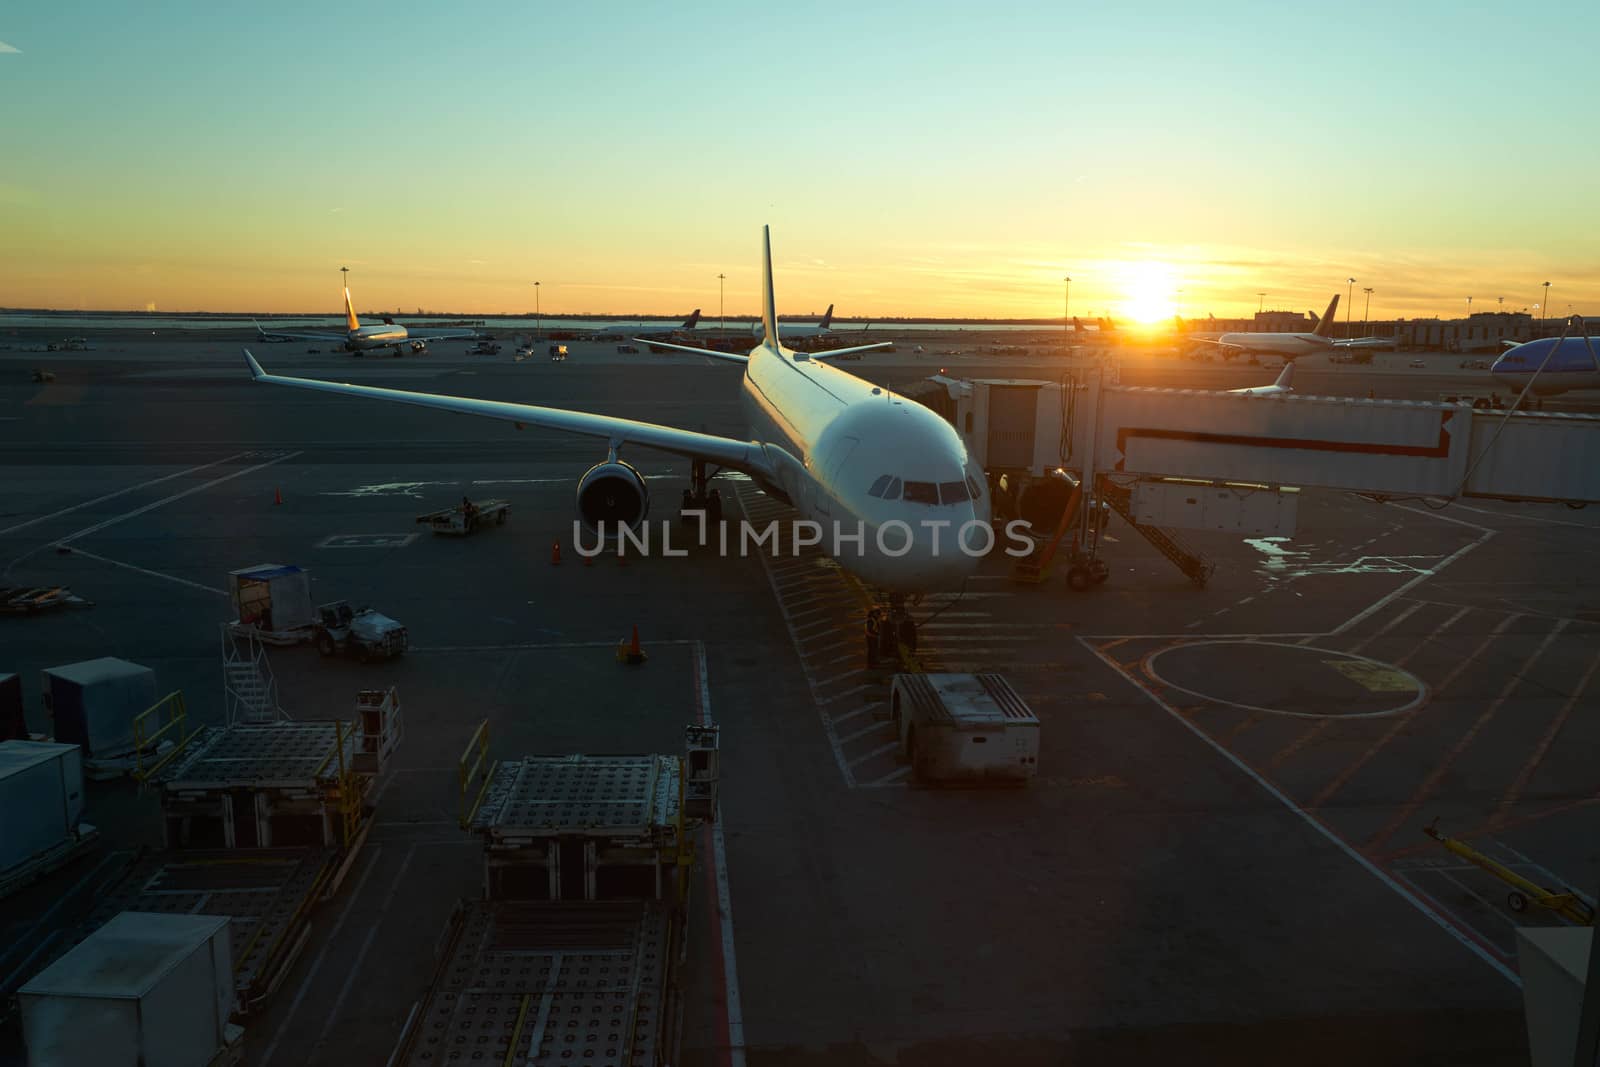 Top down view of a docked plane at airport on sunset with the golden light of the sun warming the scene.